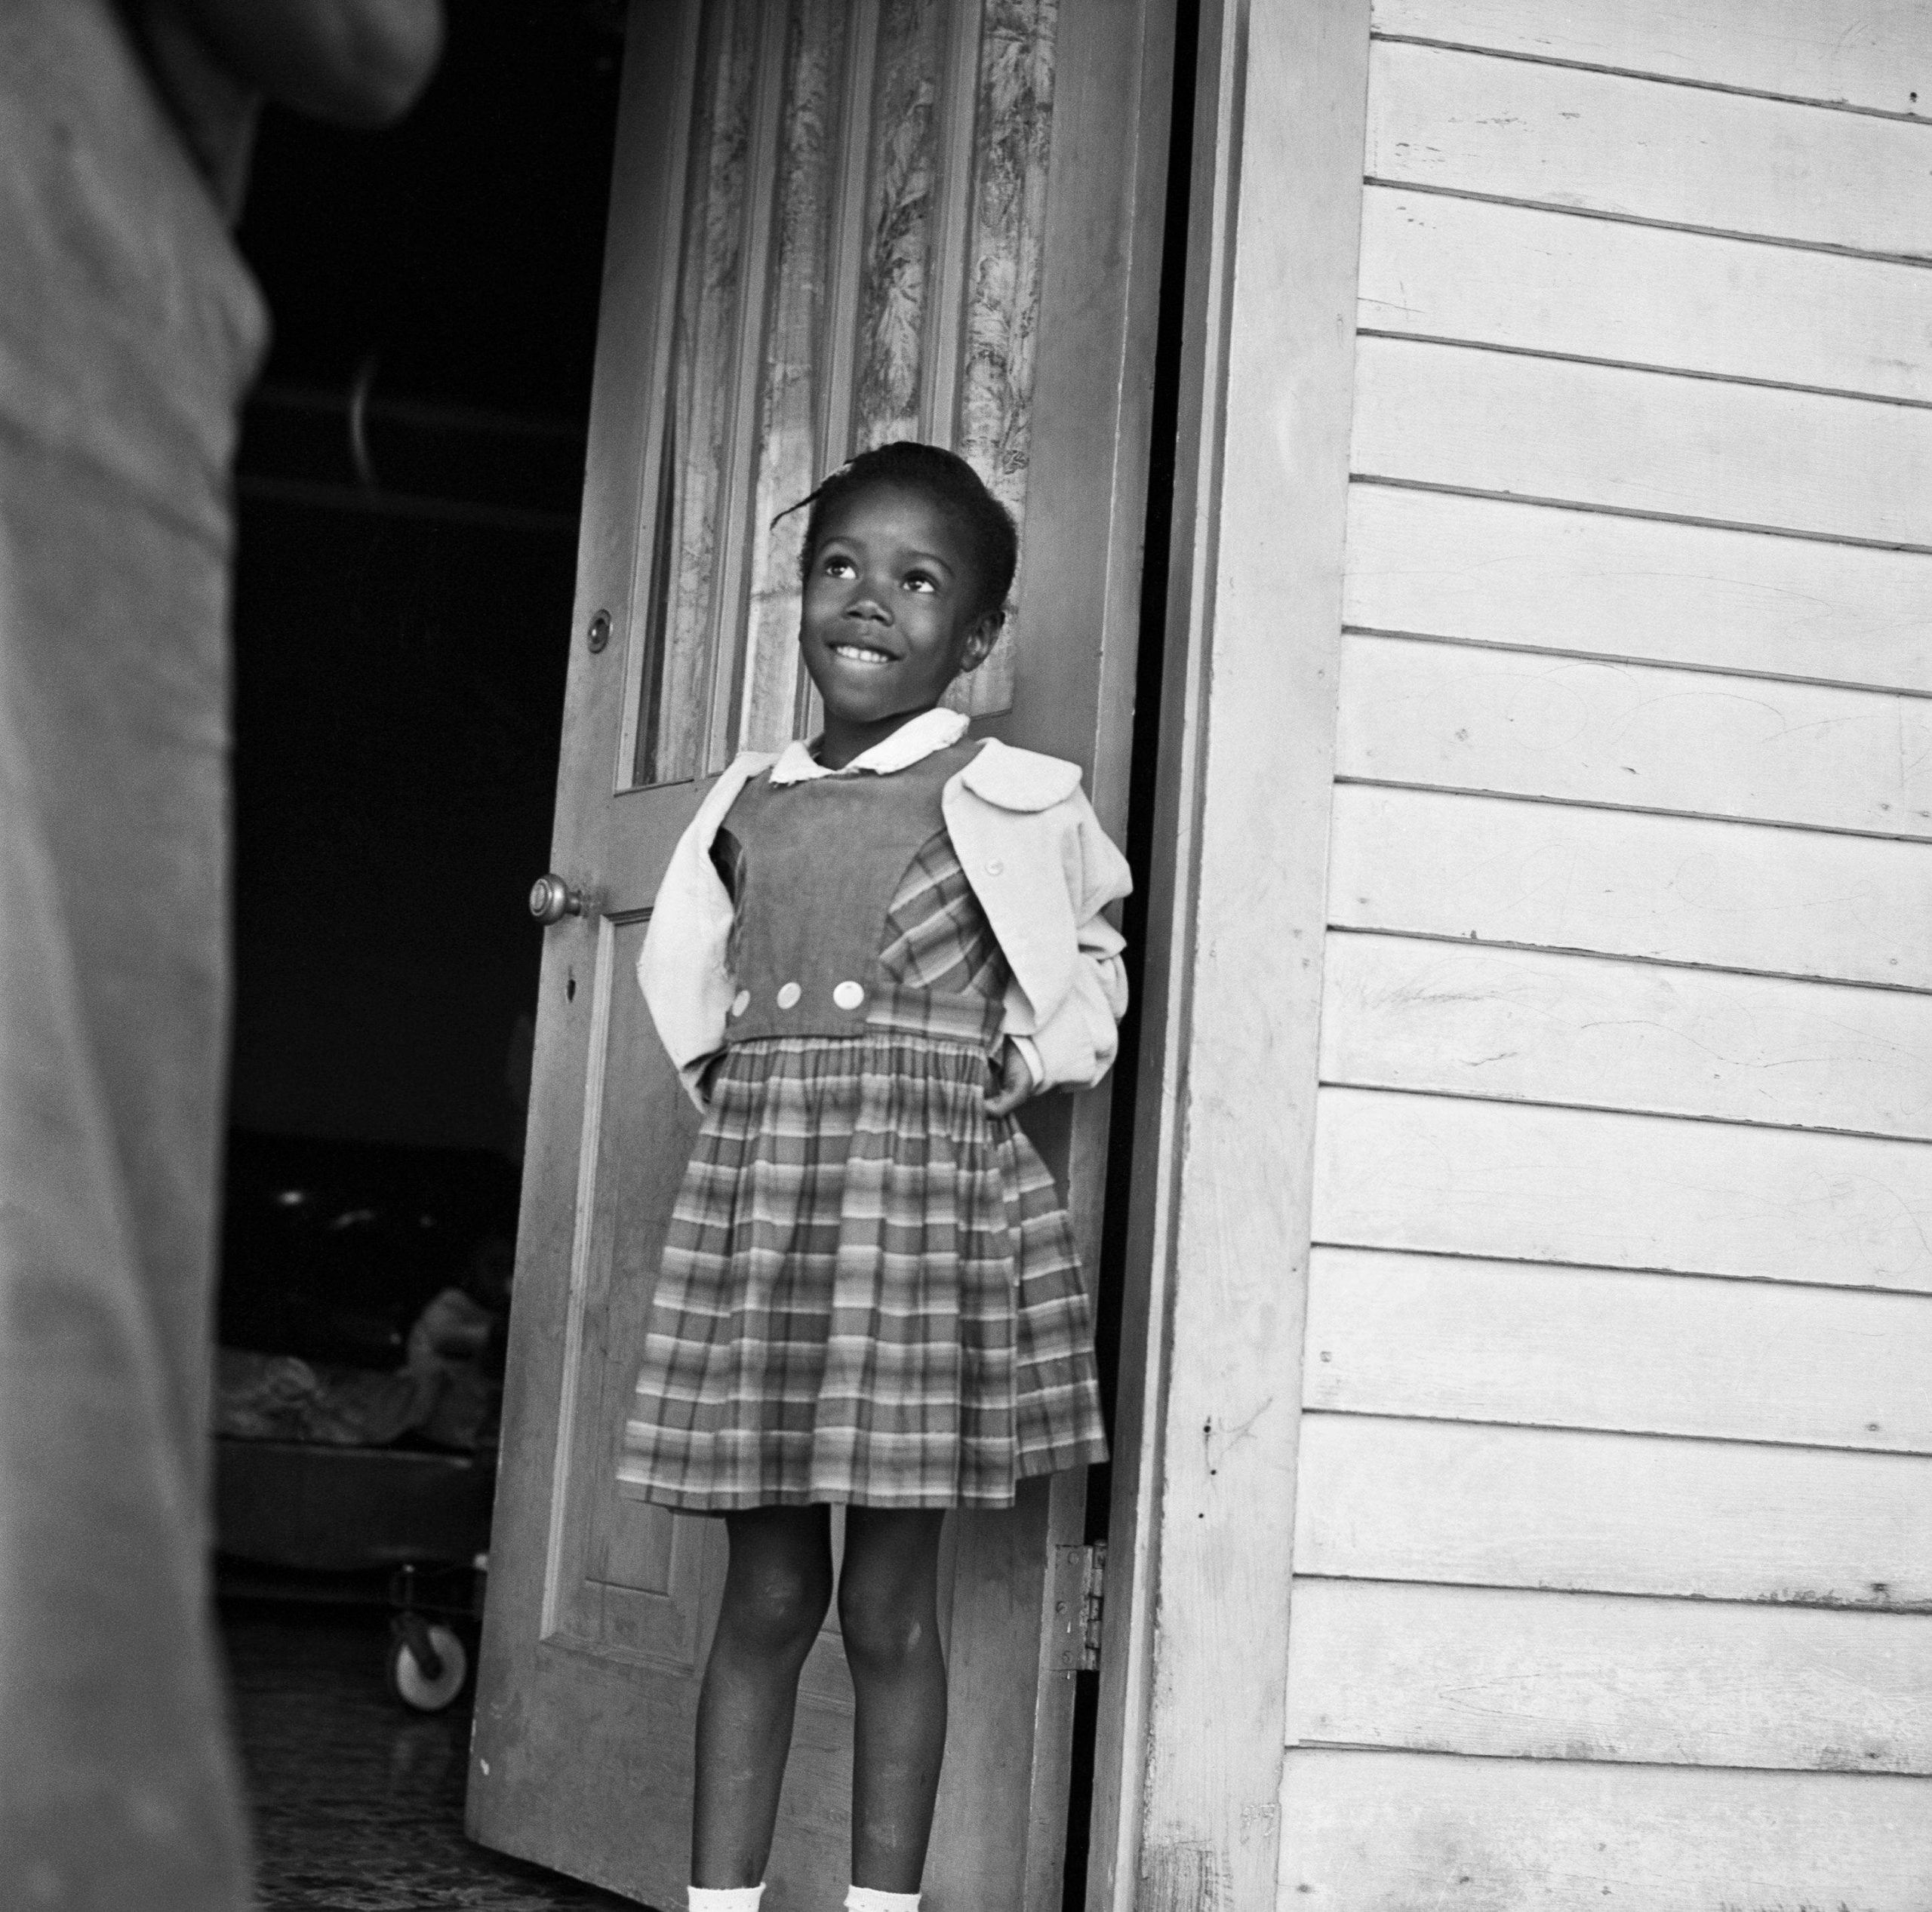 Unsung Heroine: 10 Interesting Facts About Ruby Bridges You Didn't Know